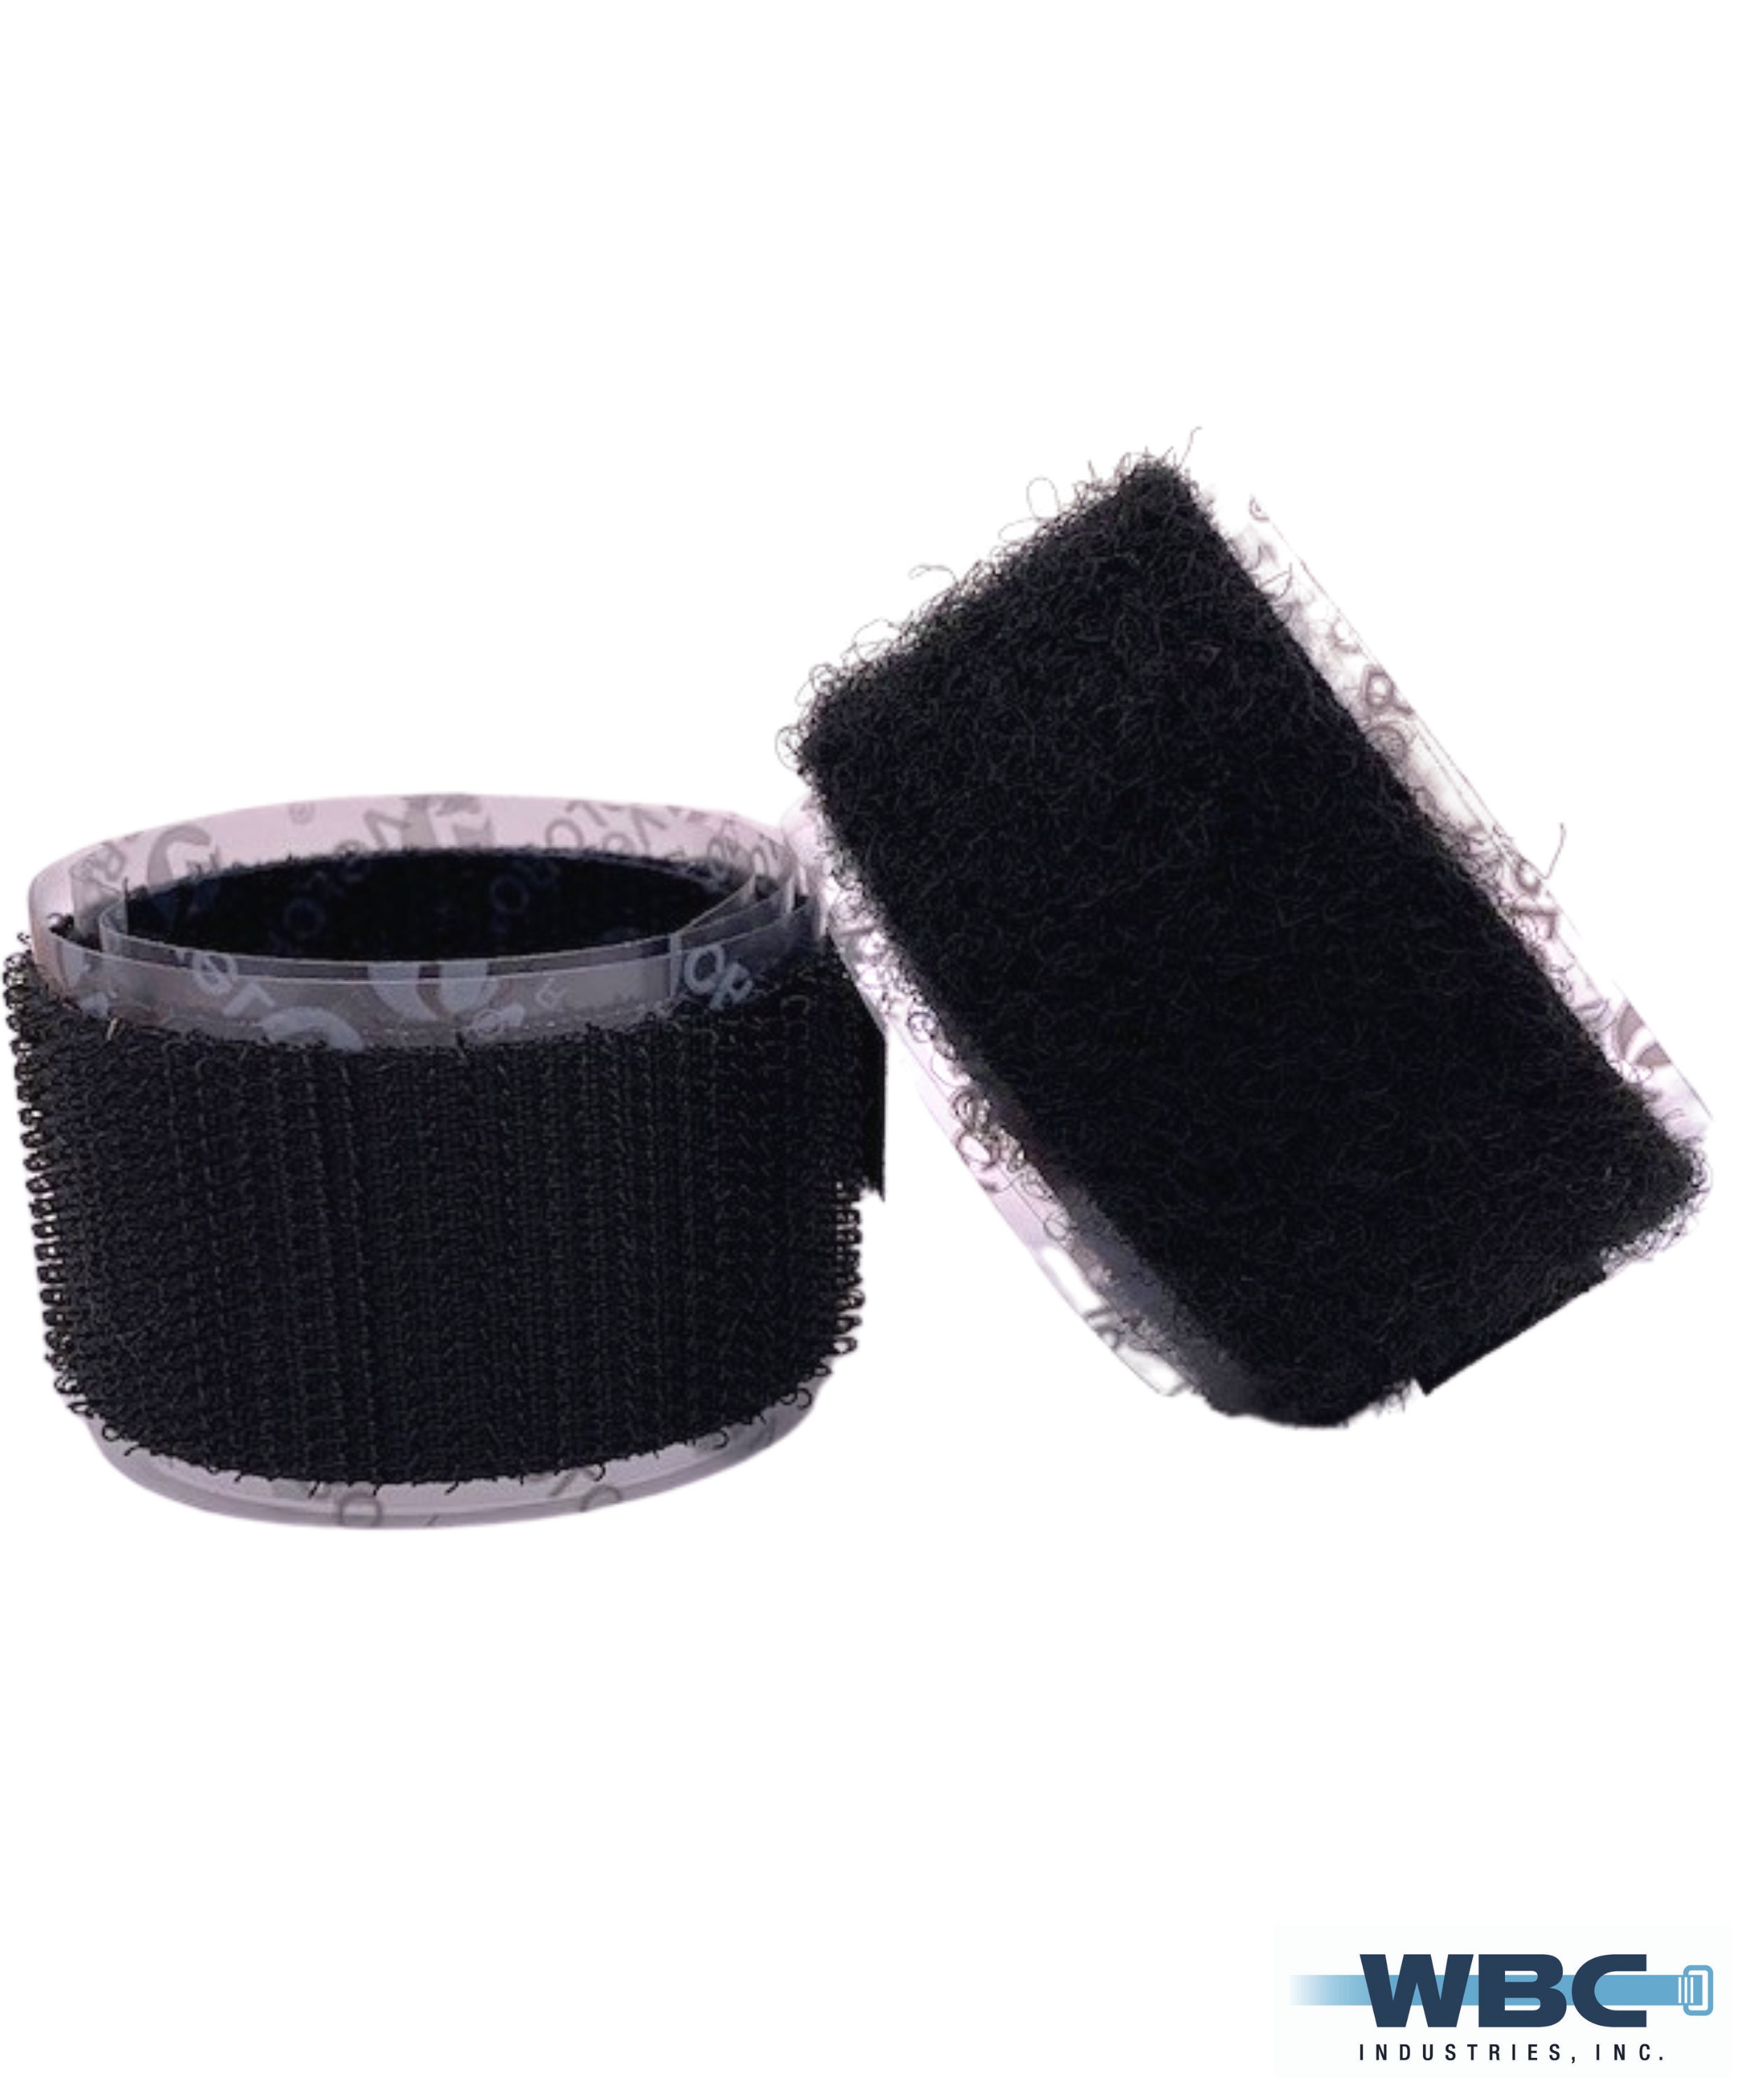 Velcro Tape. White or Black. Hook and Loop Tape. 1mtr X 20mm. Stick on  Adhesive Tape. Strong. Easy to Use. 